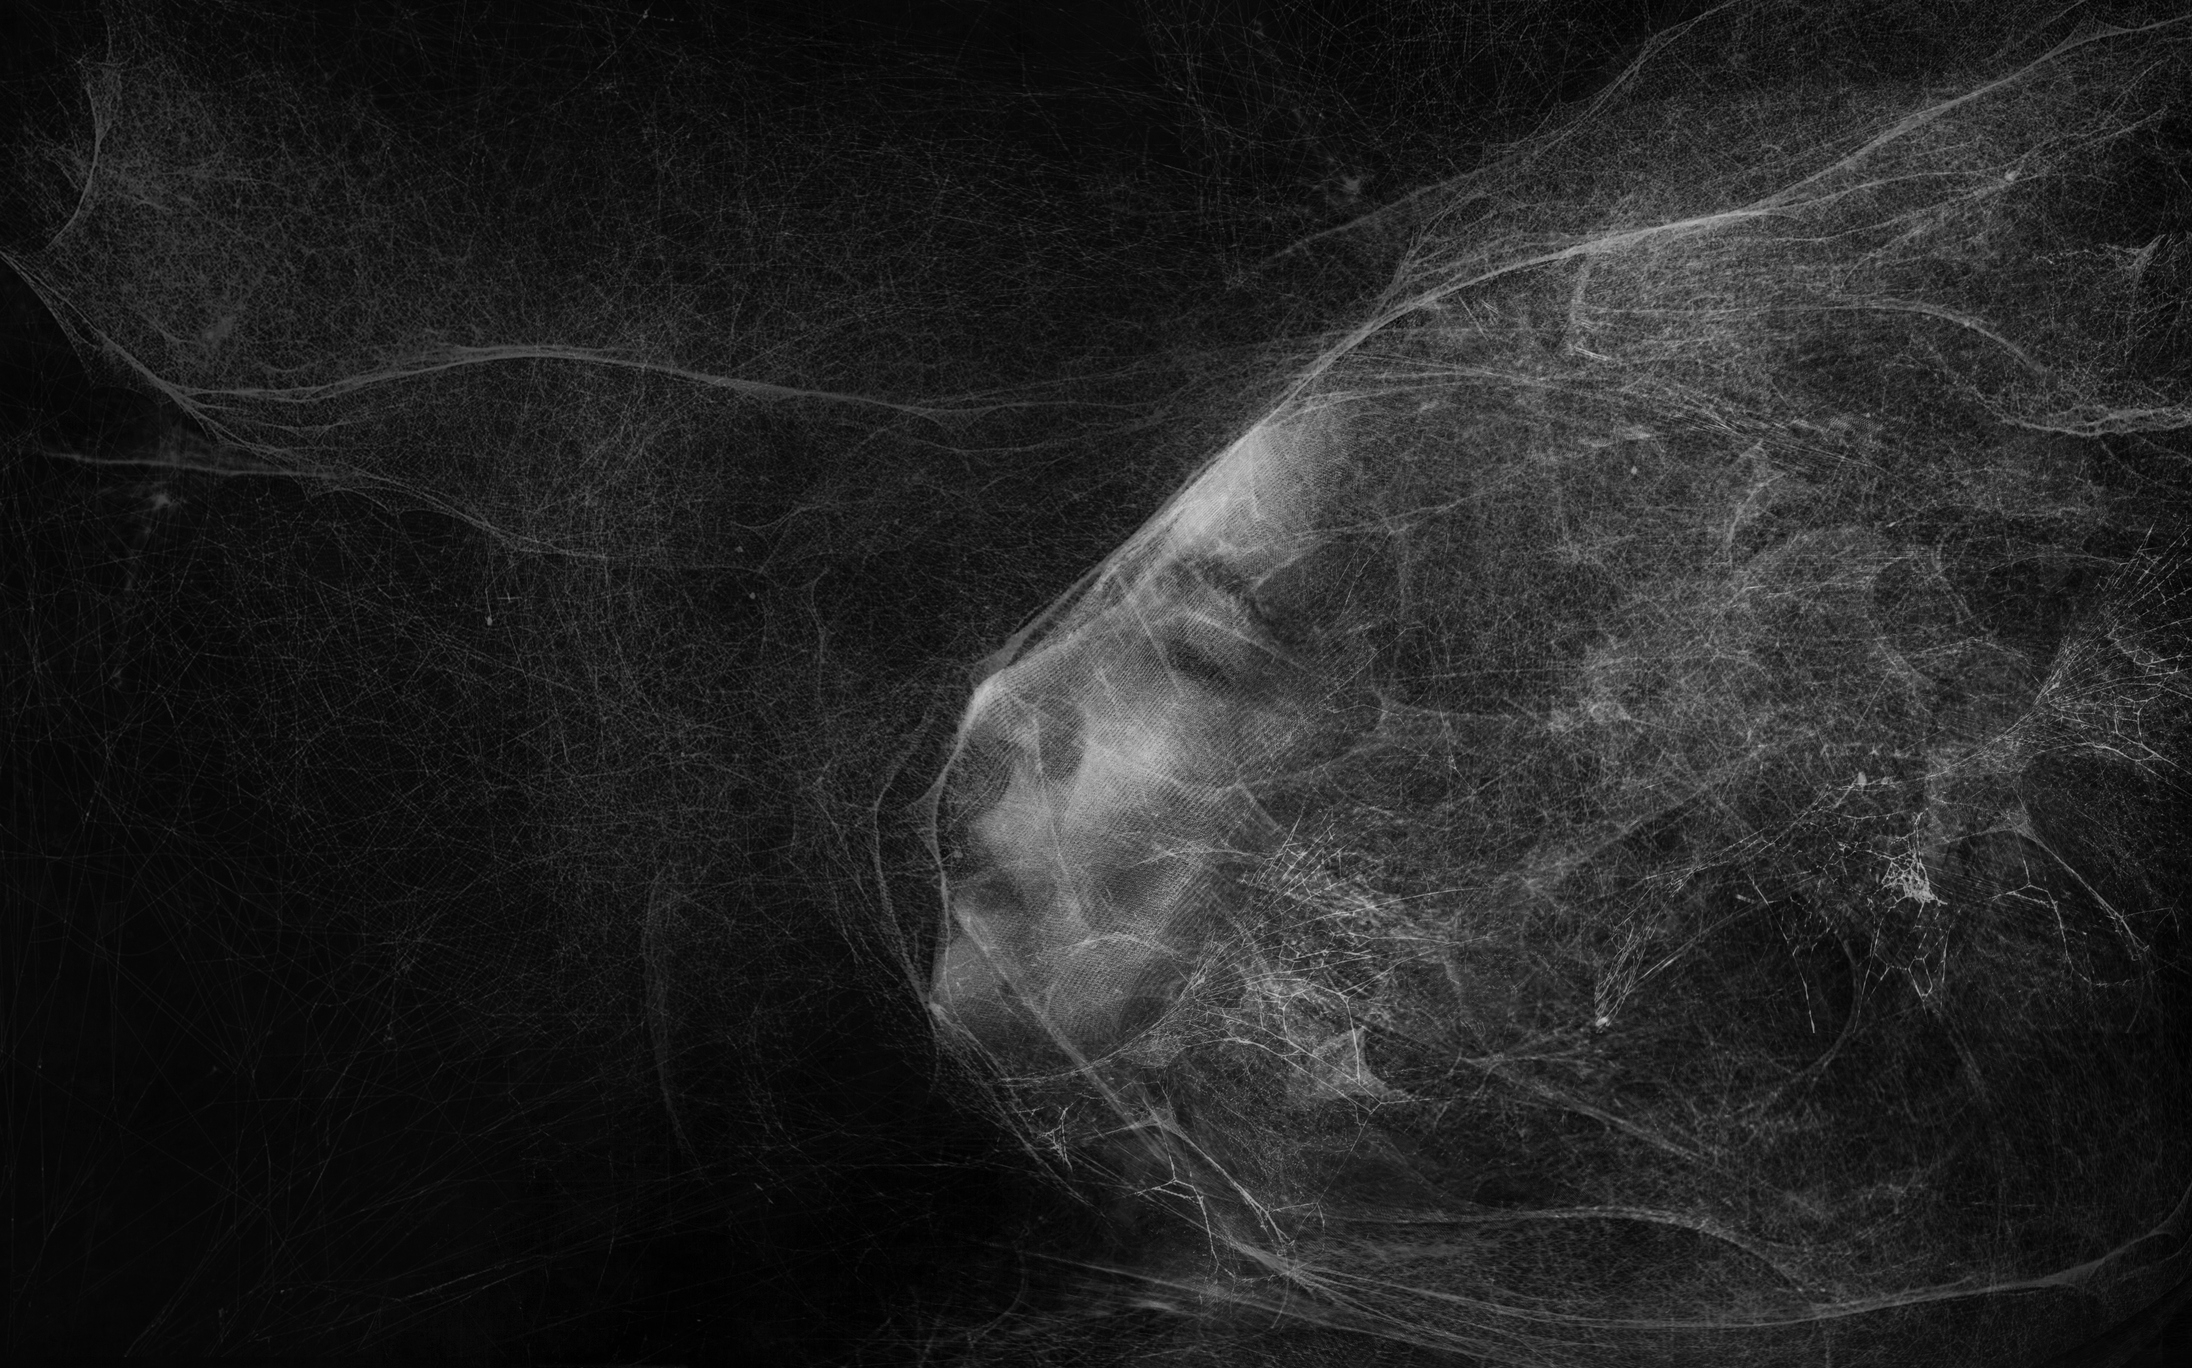 Side view of a face with the eyes closed covered by a cobweb-like substance against a dark background